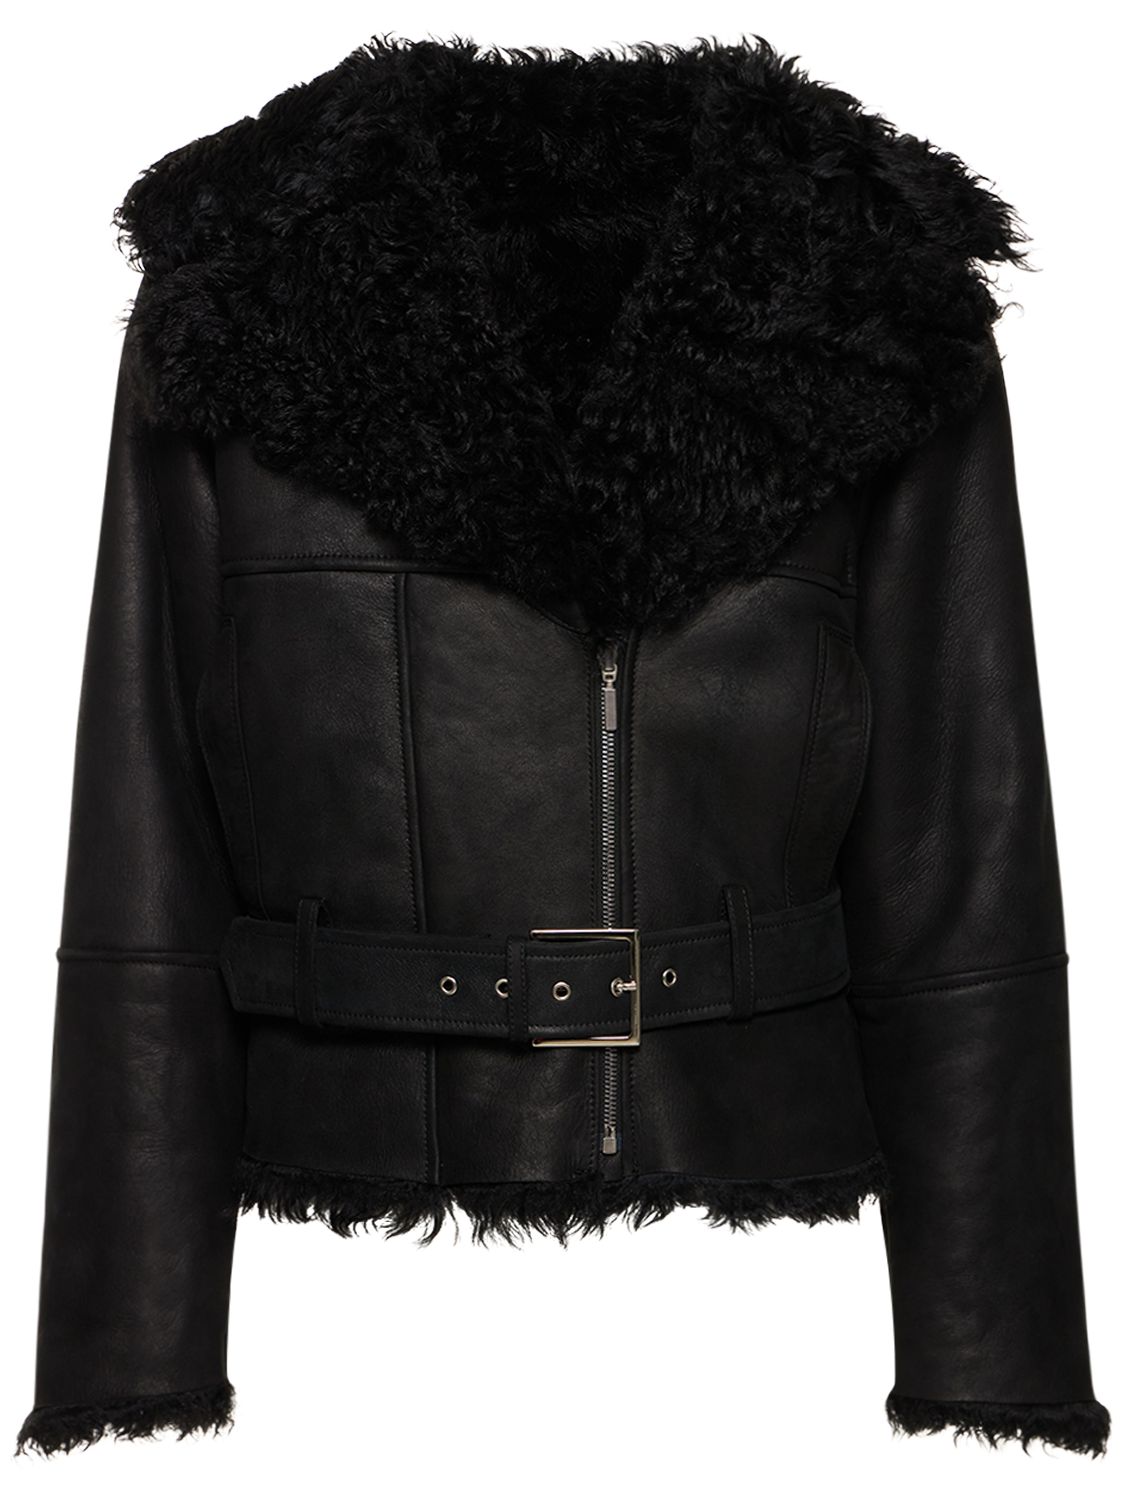 Leather & Shearling Jacket